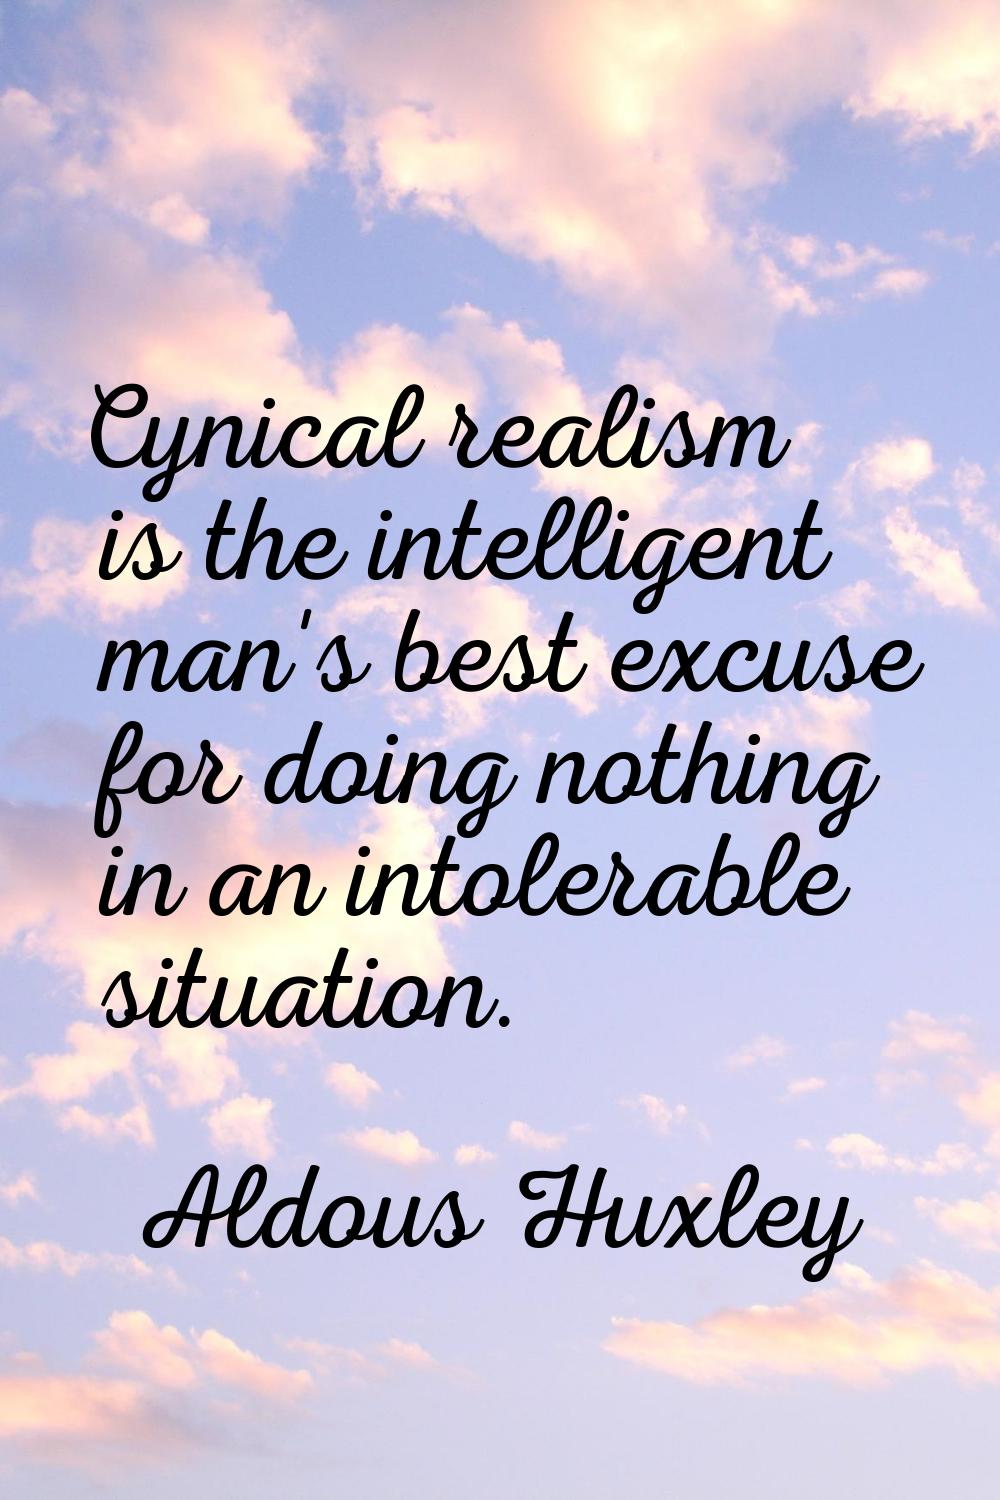 Cynical realism is the intelligent man's best excuse for doing nothing in an intolerable situation.